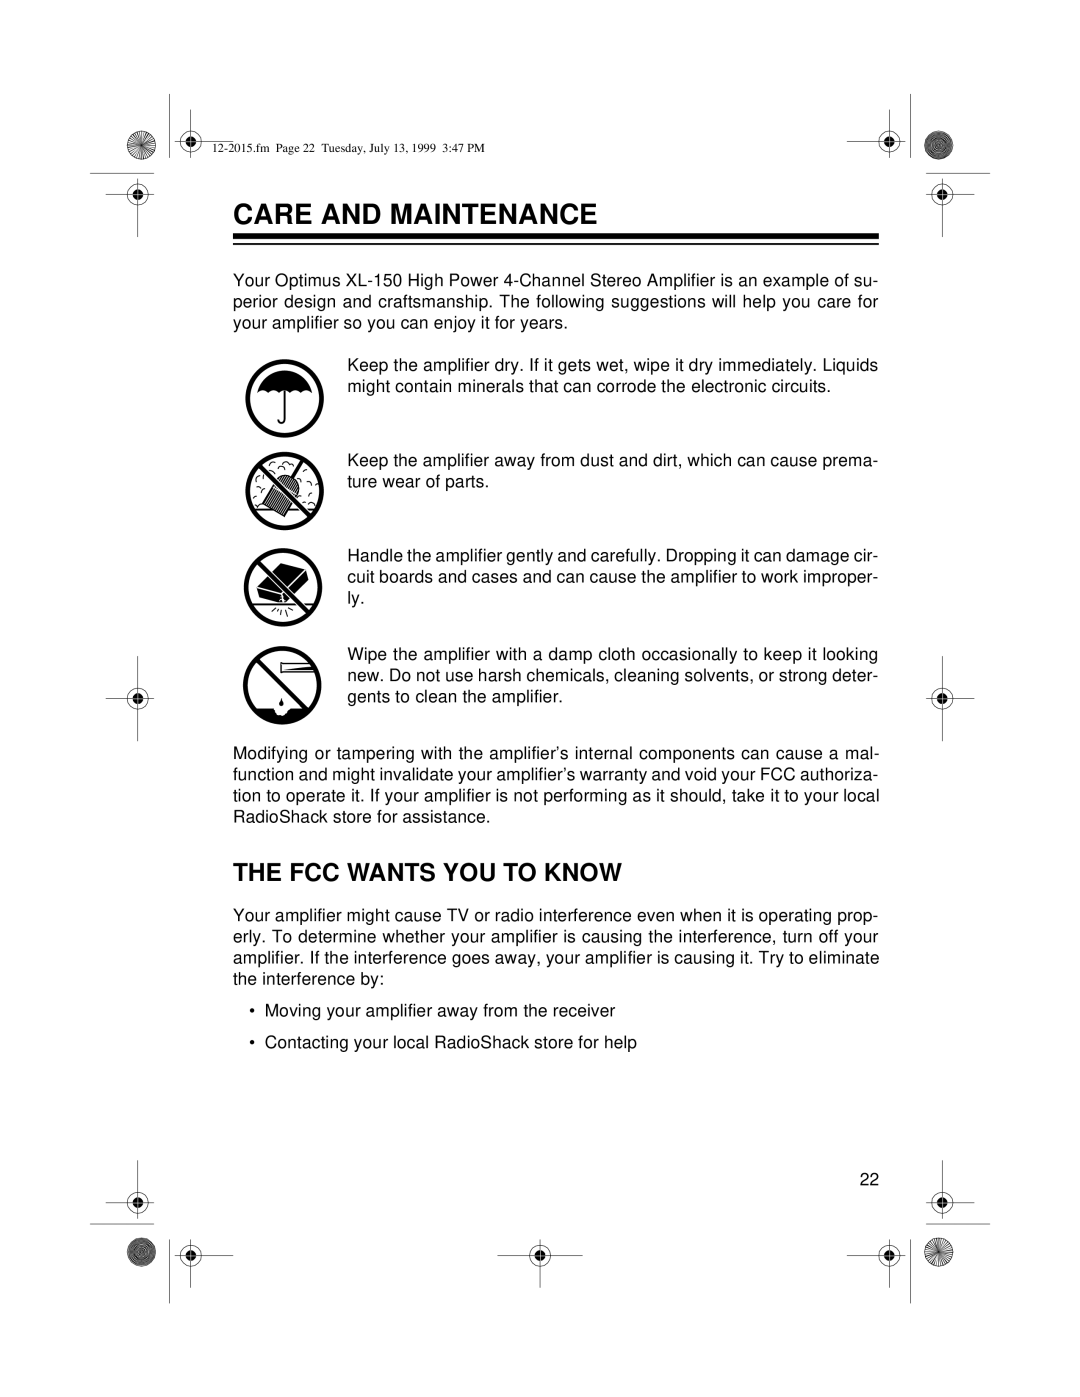 Radio Shack XL-150 owner manual Care And Maintenance, The Fcc Wants You To Know 